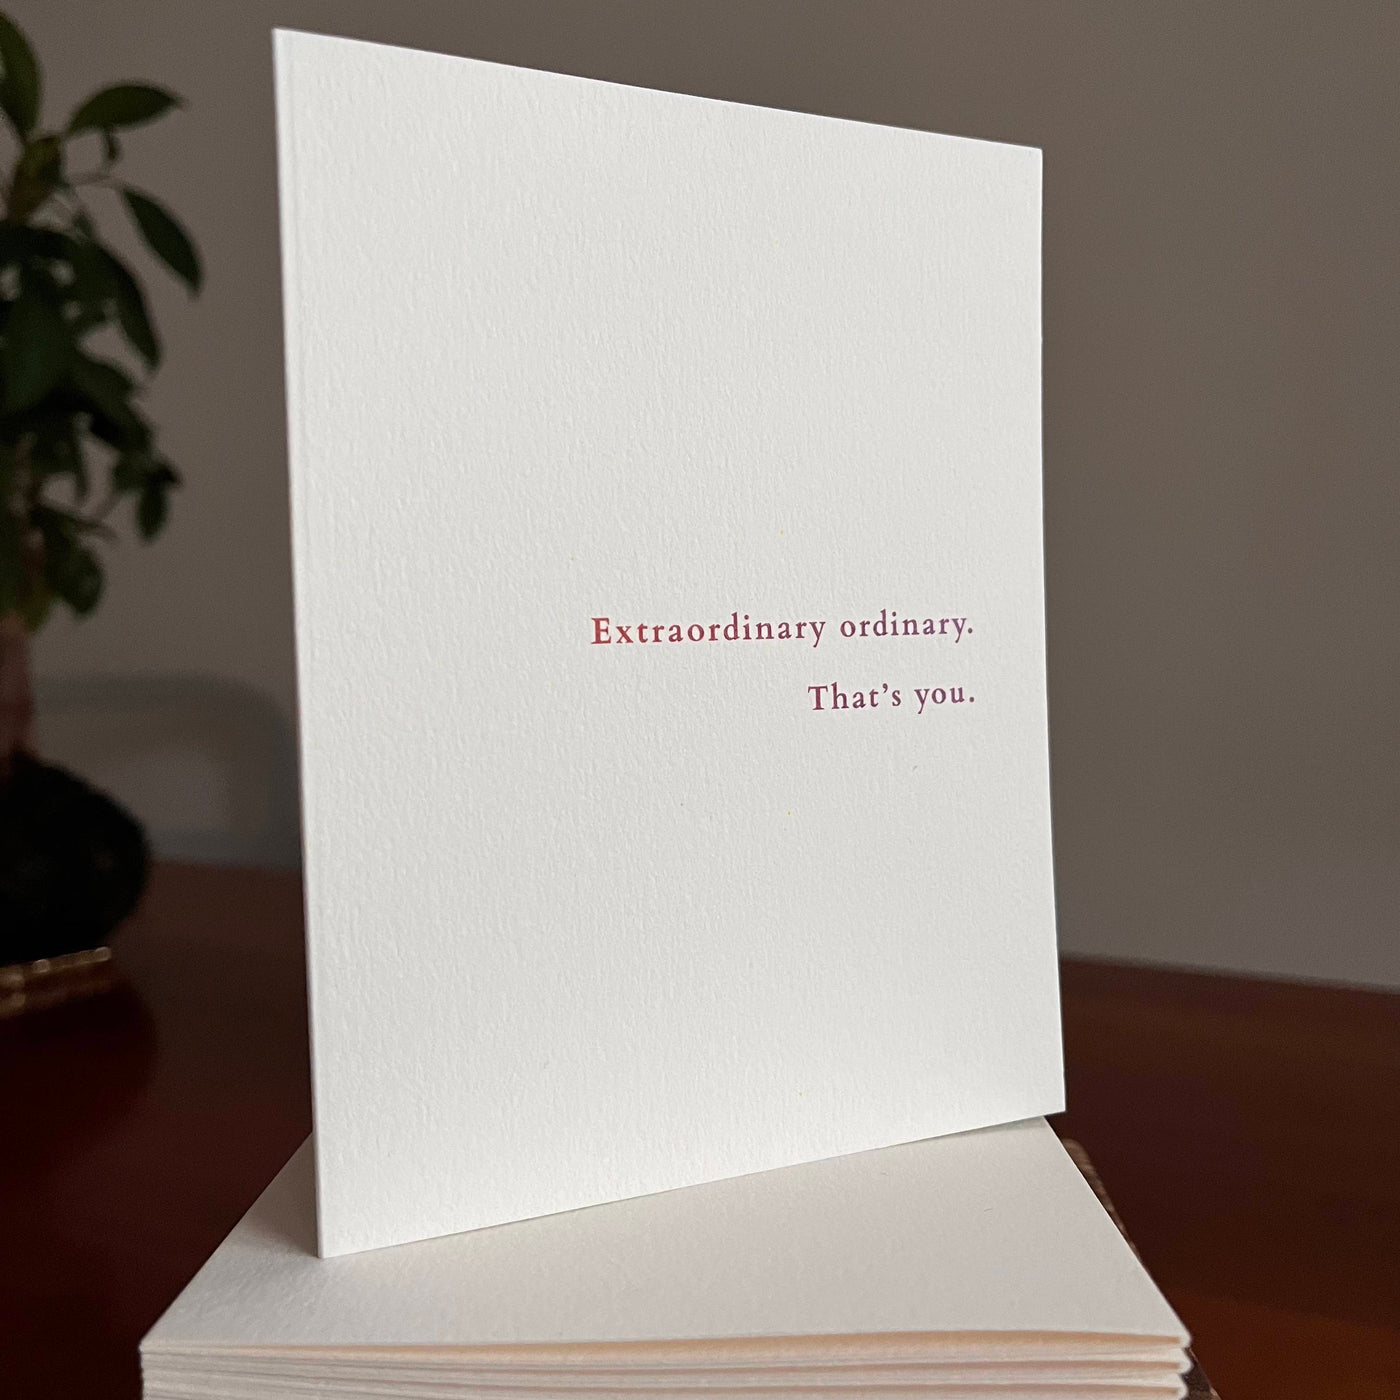 Beknown greeting card on stack of cards. Extraordinary ordinary. That's you.